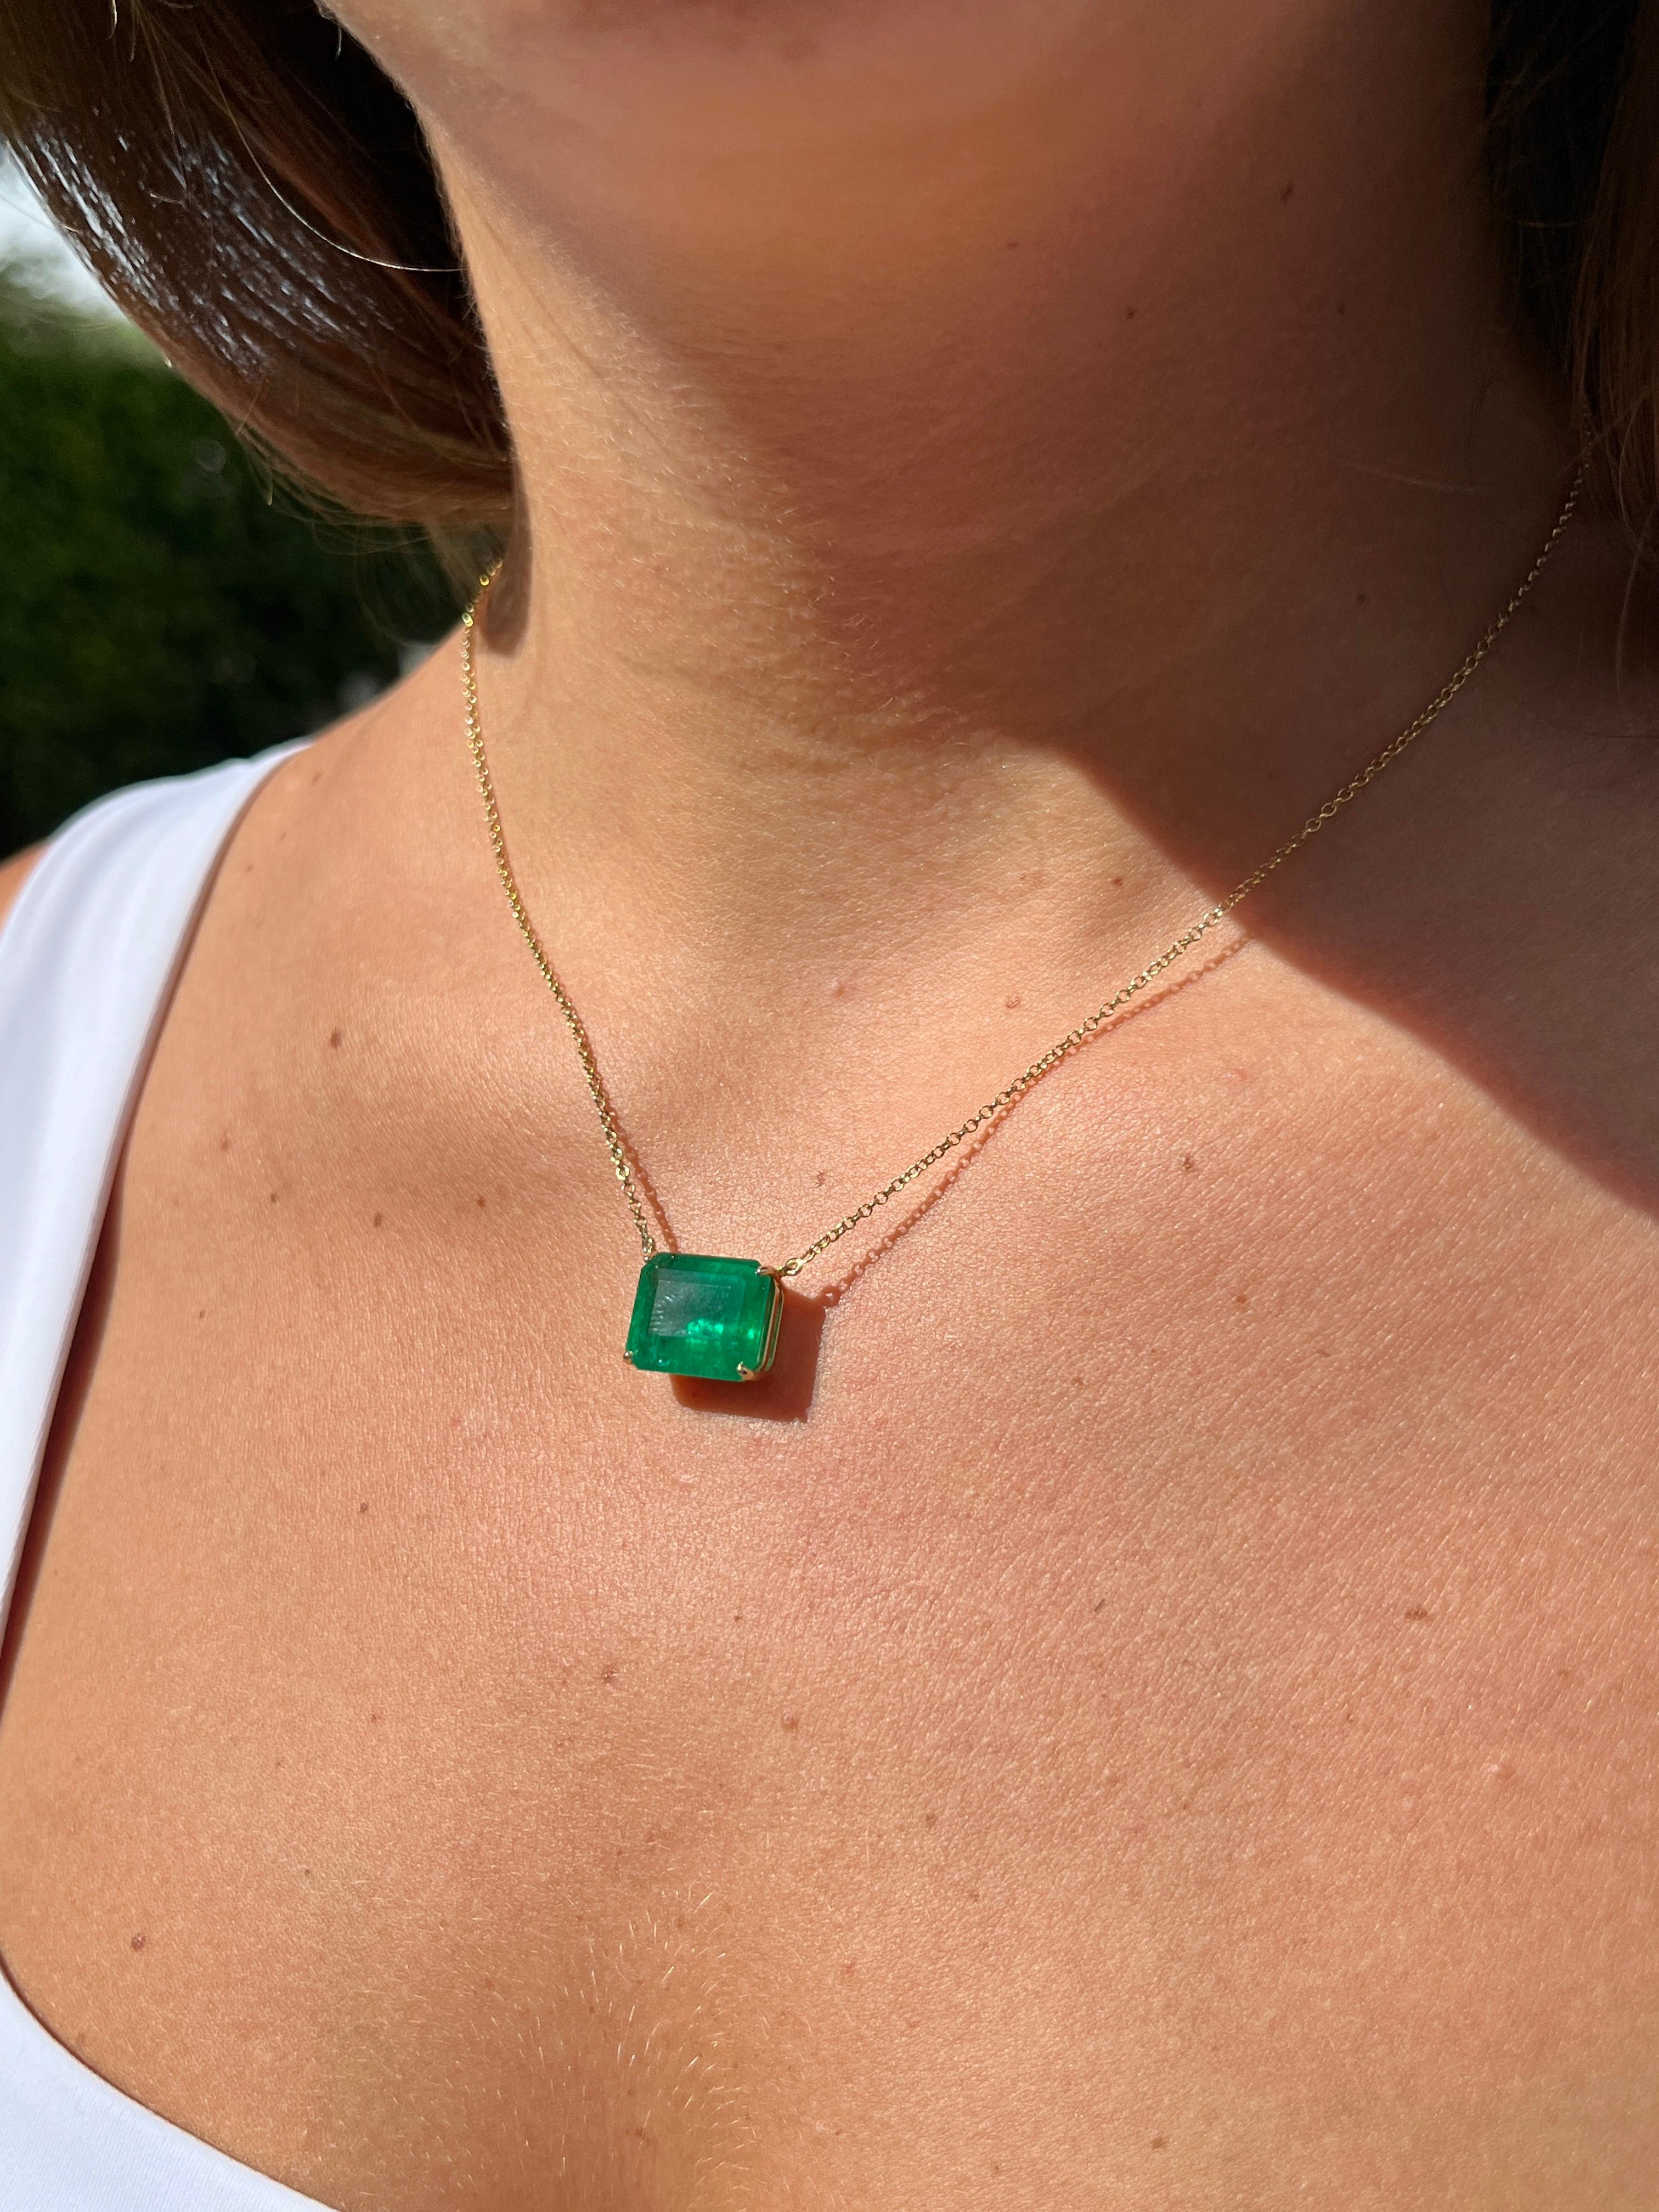 8.67 Carat Vivid Green Colombian Emerald Solitaire Pendant Necklace in 18K Gold In New Condition For Sale In Miami, FL